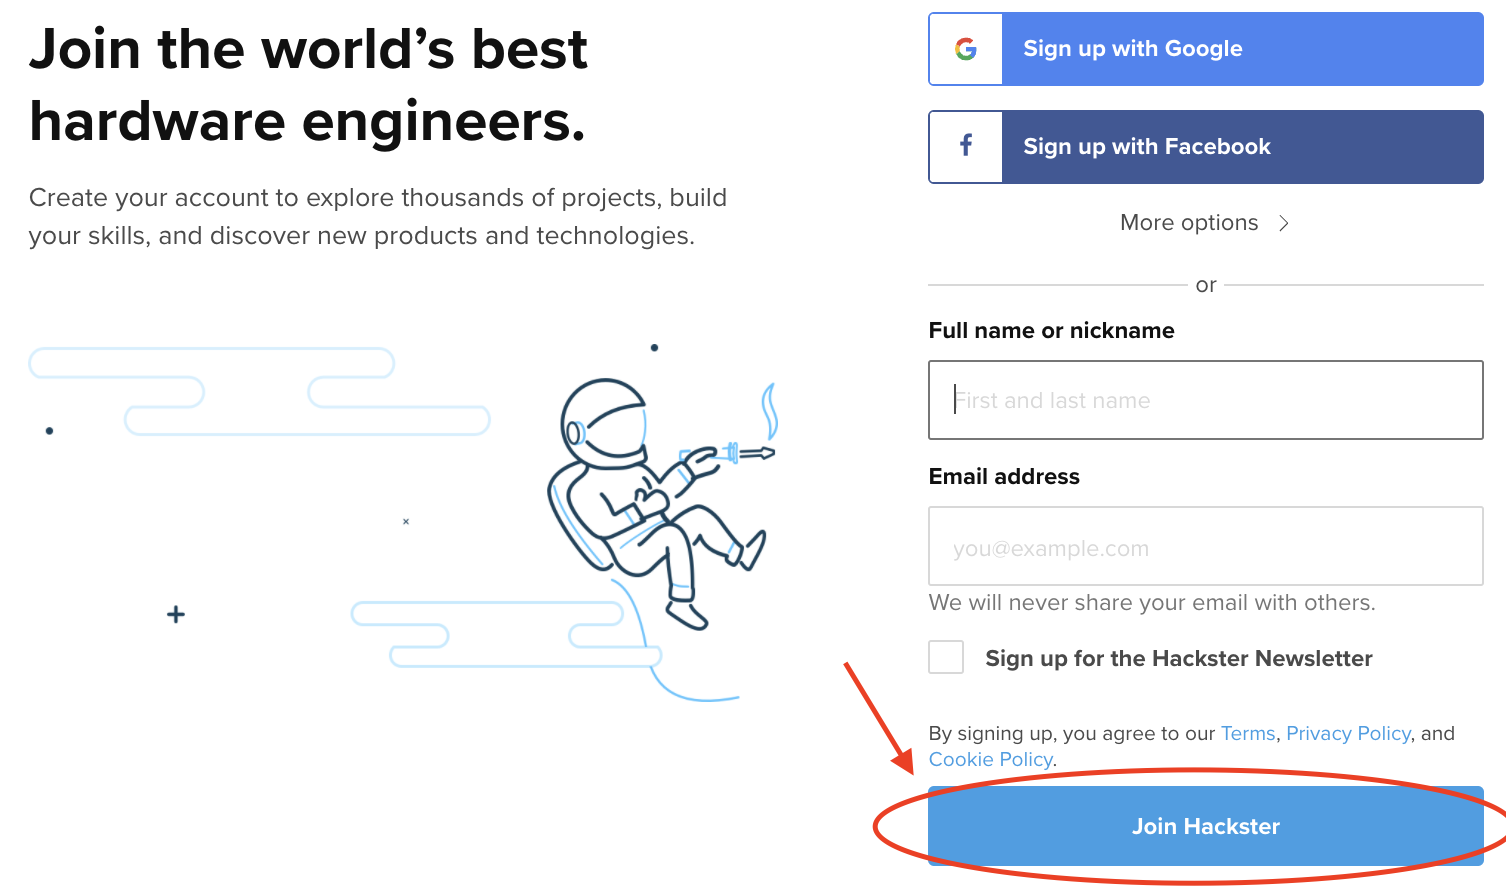 Enter your details and click 'Join Hackster'